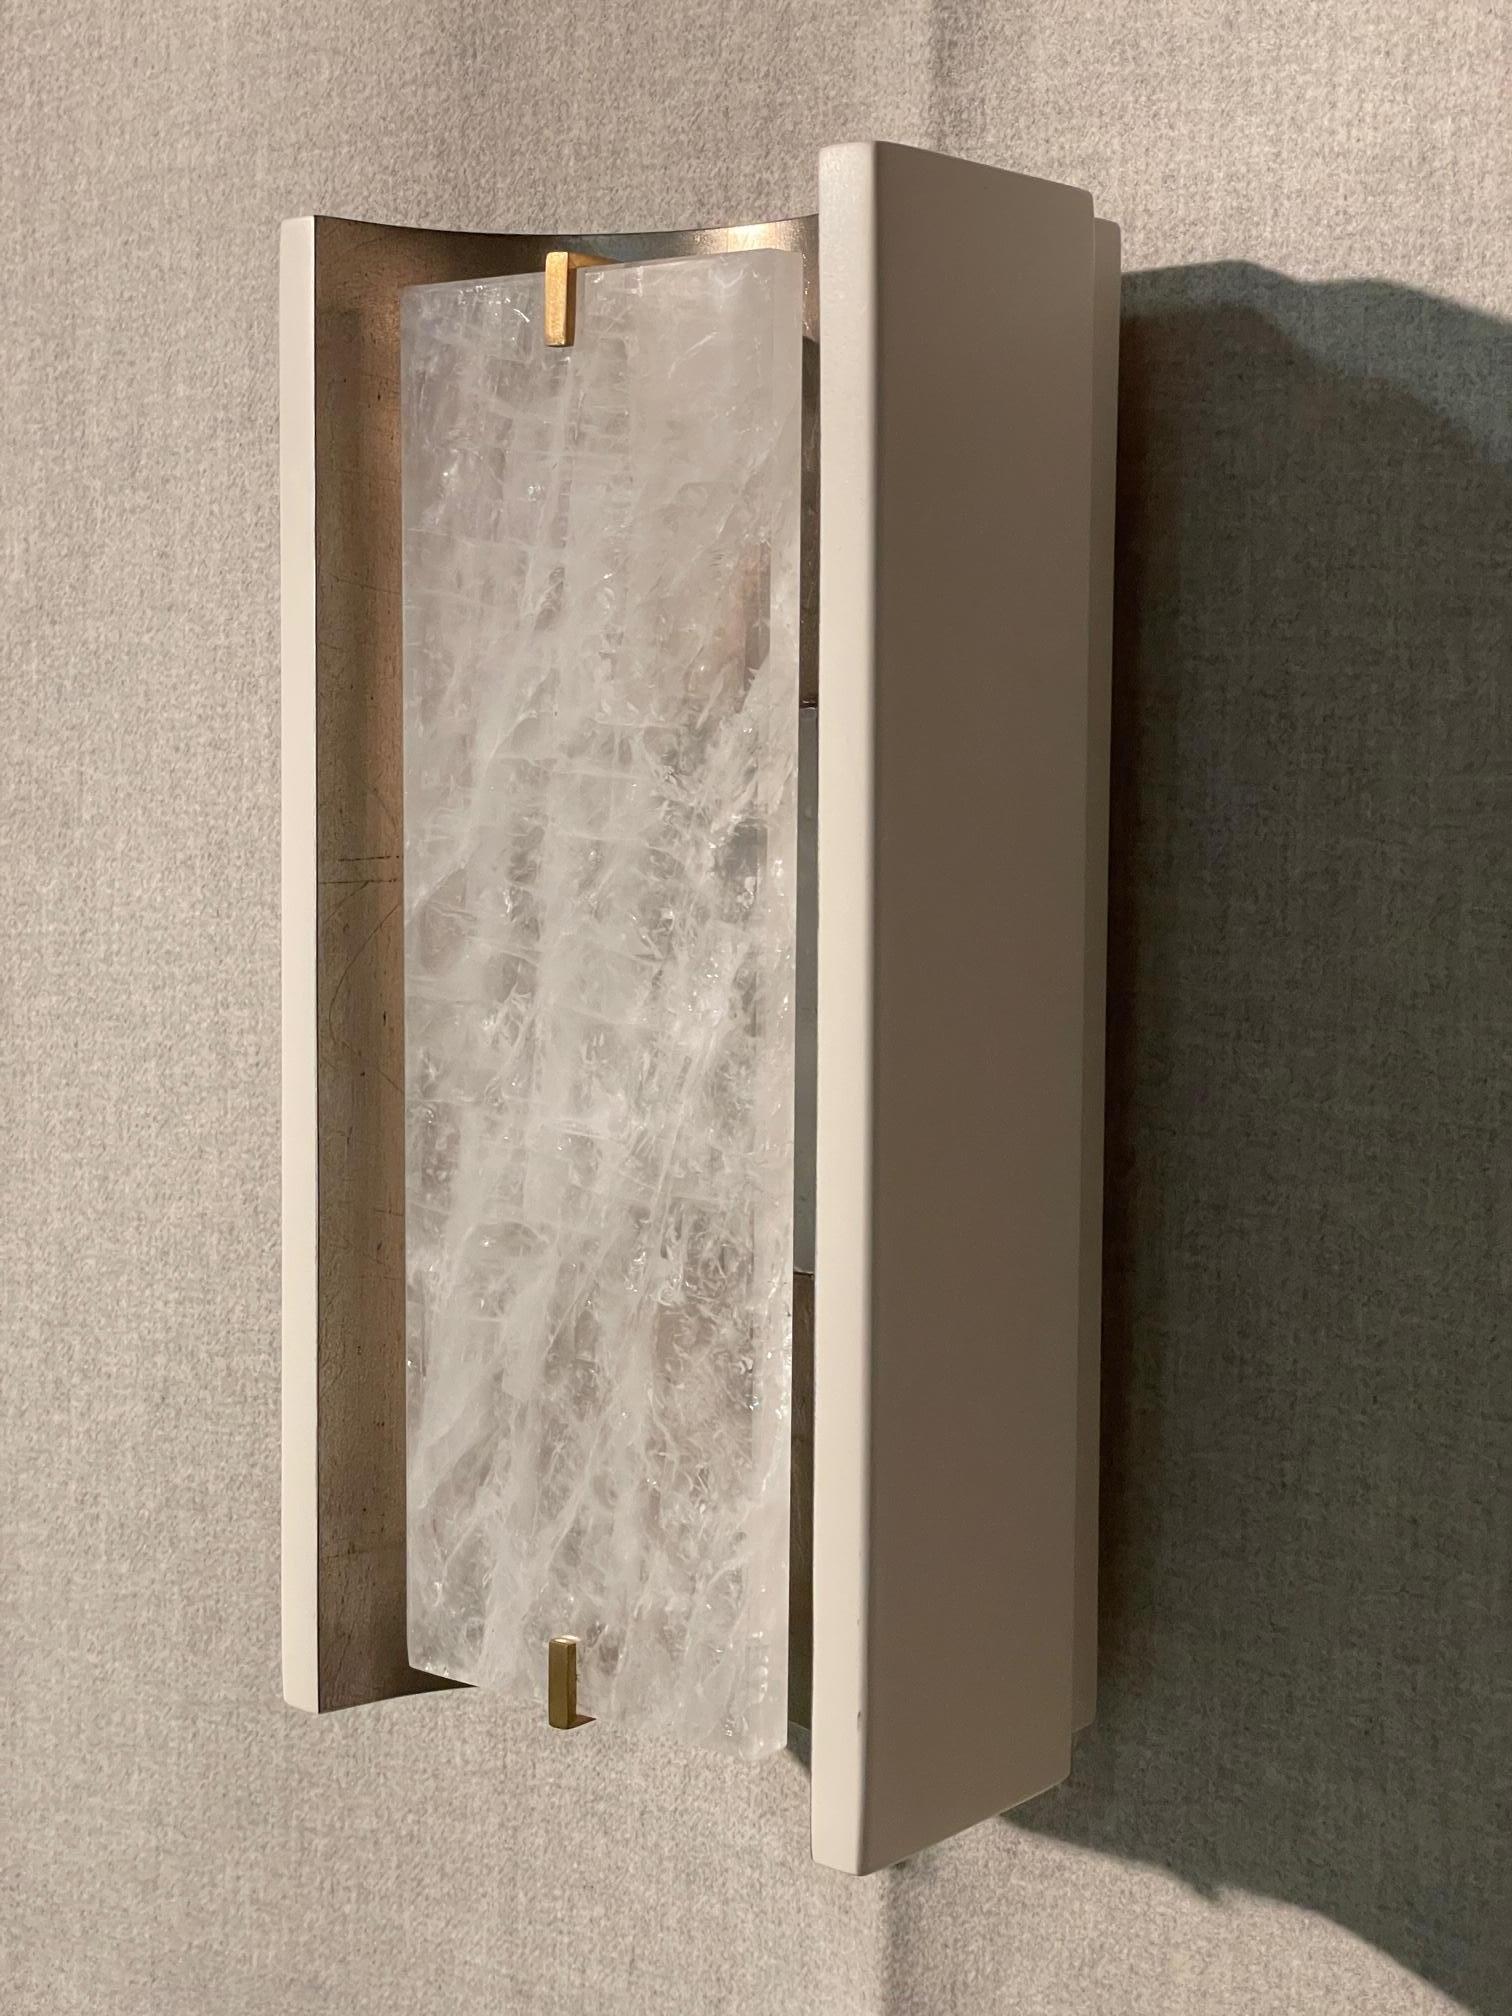 The Jean de Merry Placa de Rayon wall sconce uses two layers of rock crystal to diffuse light and create a magical, ethereal glow.  The light bounces off the Antiqued White Gold finish on the interior of the fixture while a subtle Liso satin finish